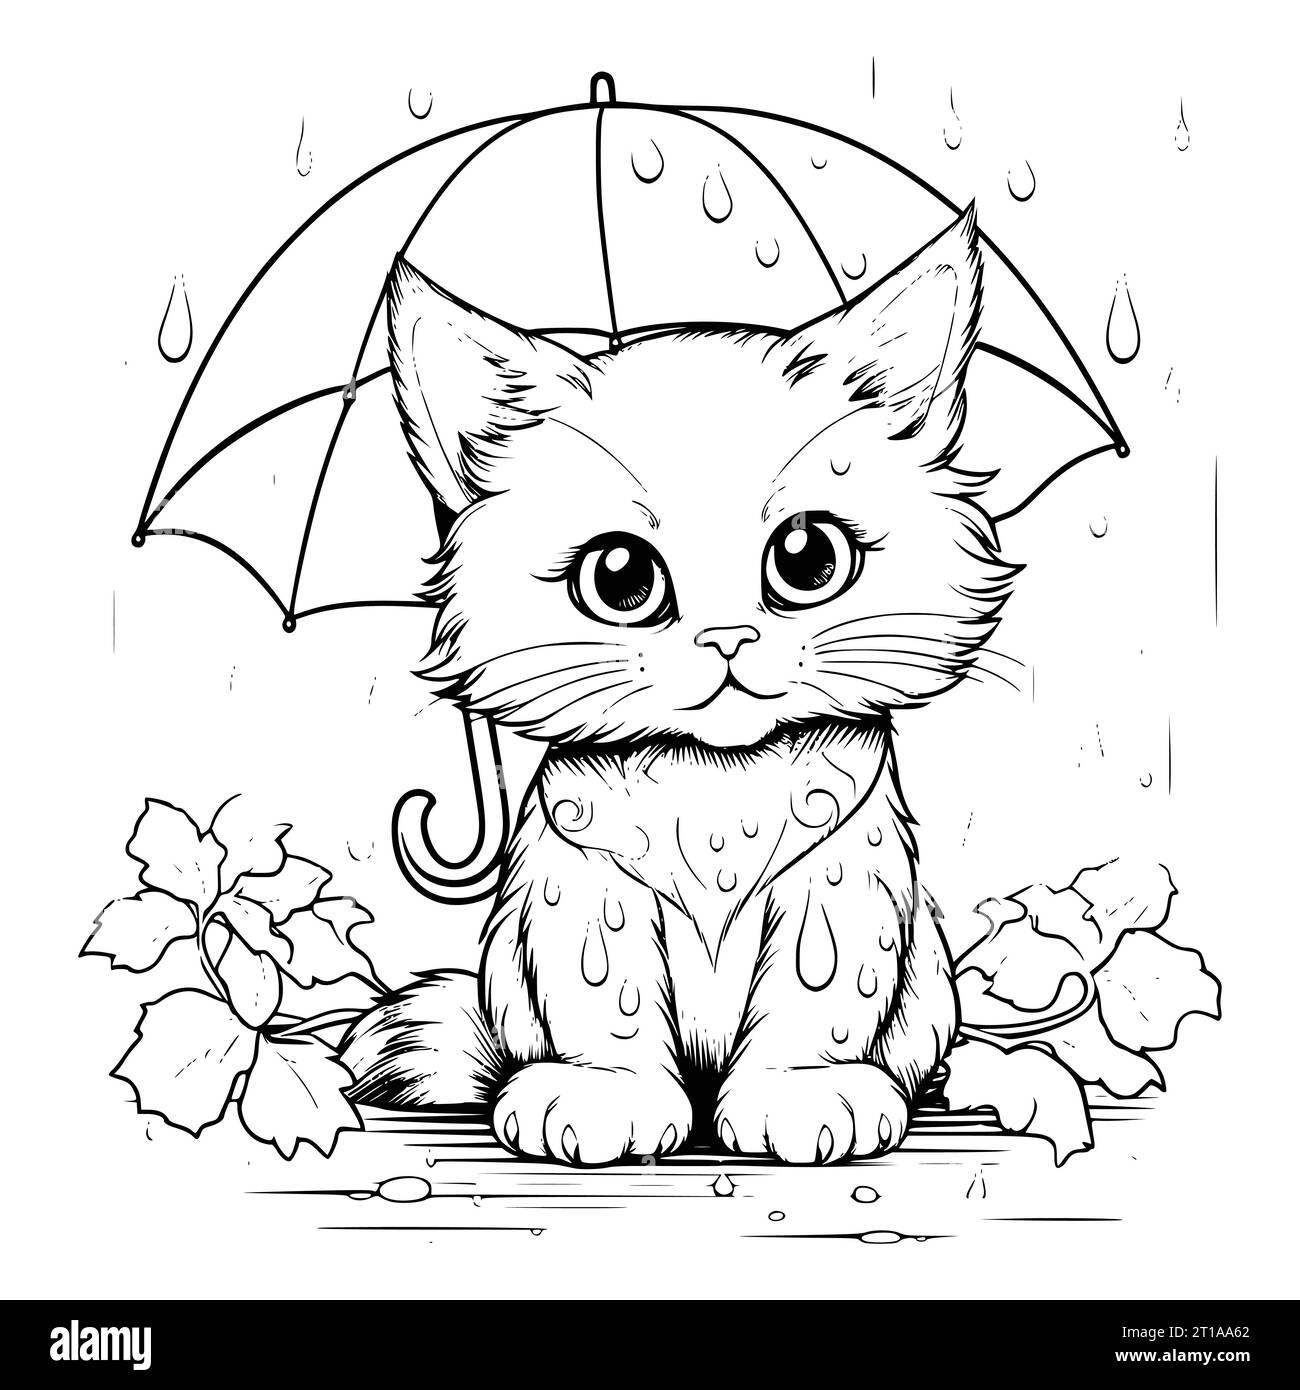 Cat In Rainy Day Coloring Page For Kids Stock Vector